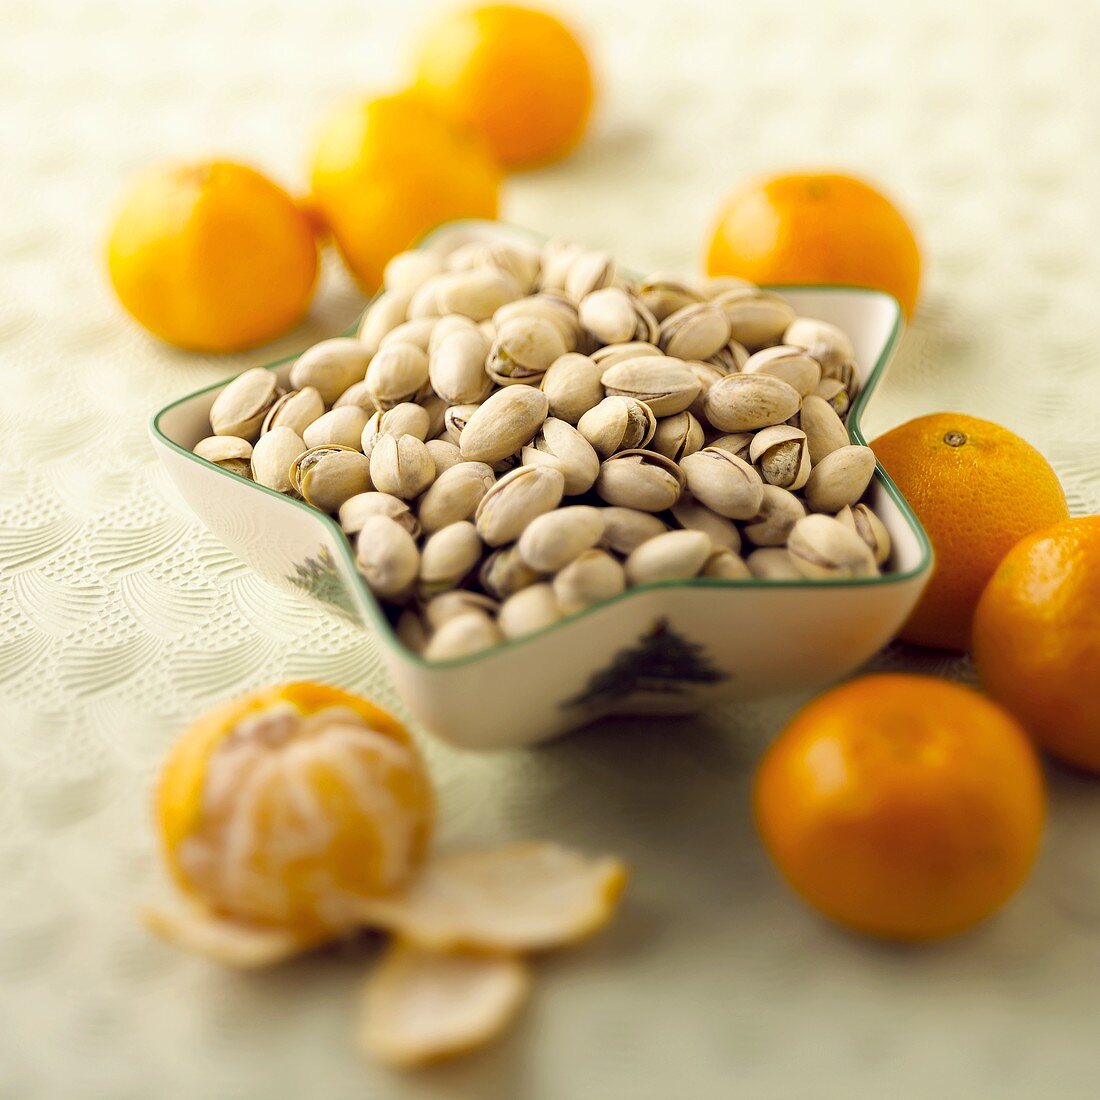 Pistachios in a Star Shaped Bowl with Clementines